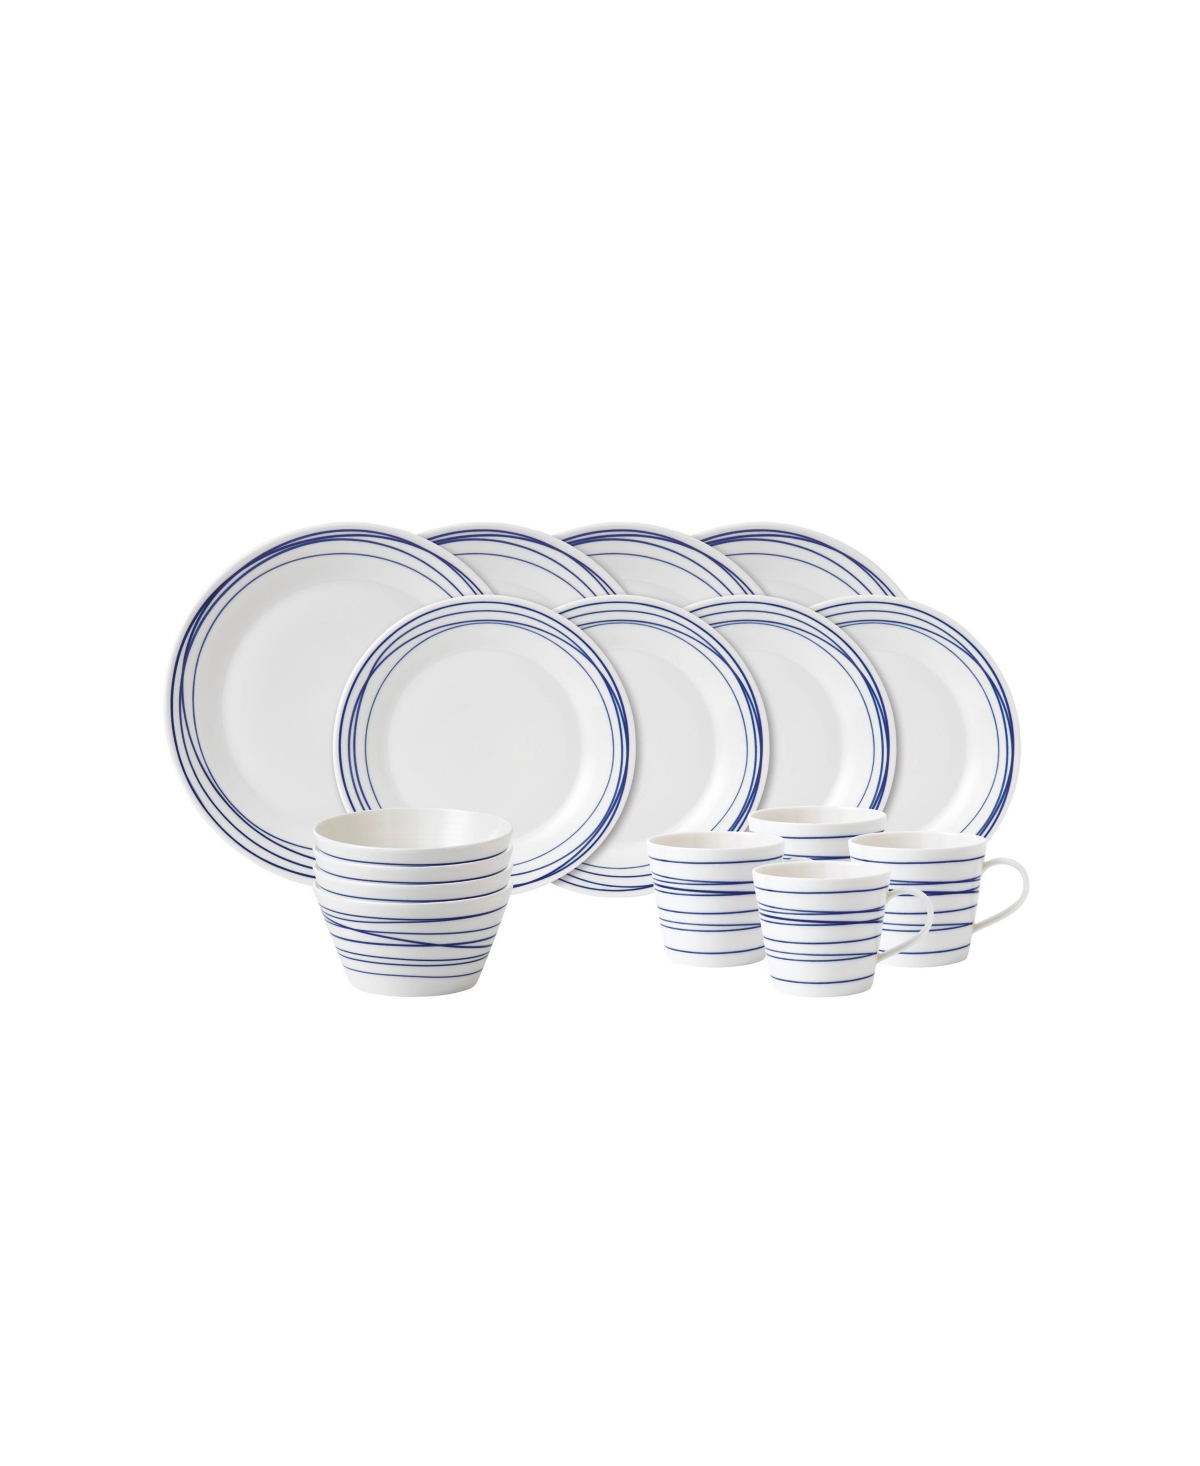 Pacific Lines 16-Pc Dinnerware Set, Service for 4 - Blue